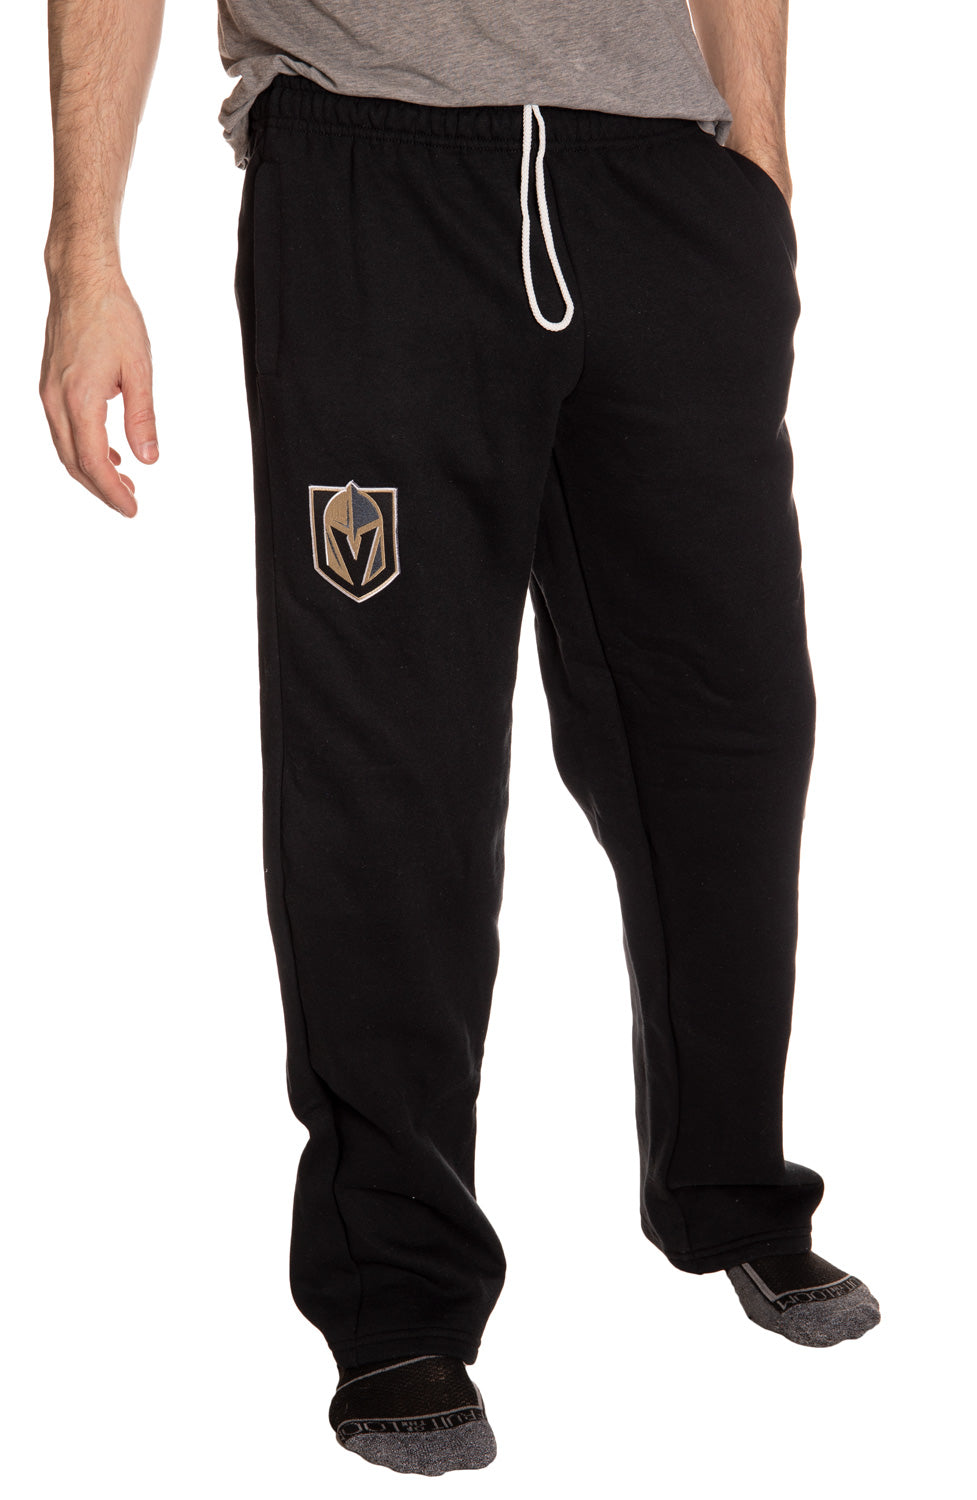 Vegas Golden Knights Official NHL Sweatpants